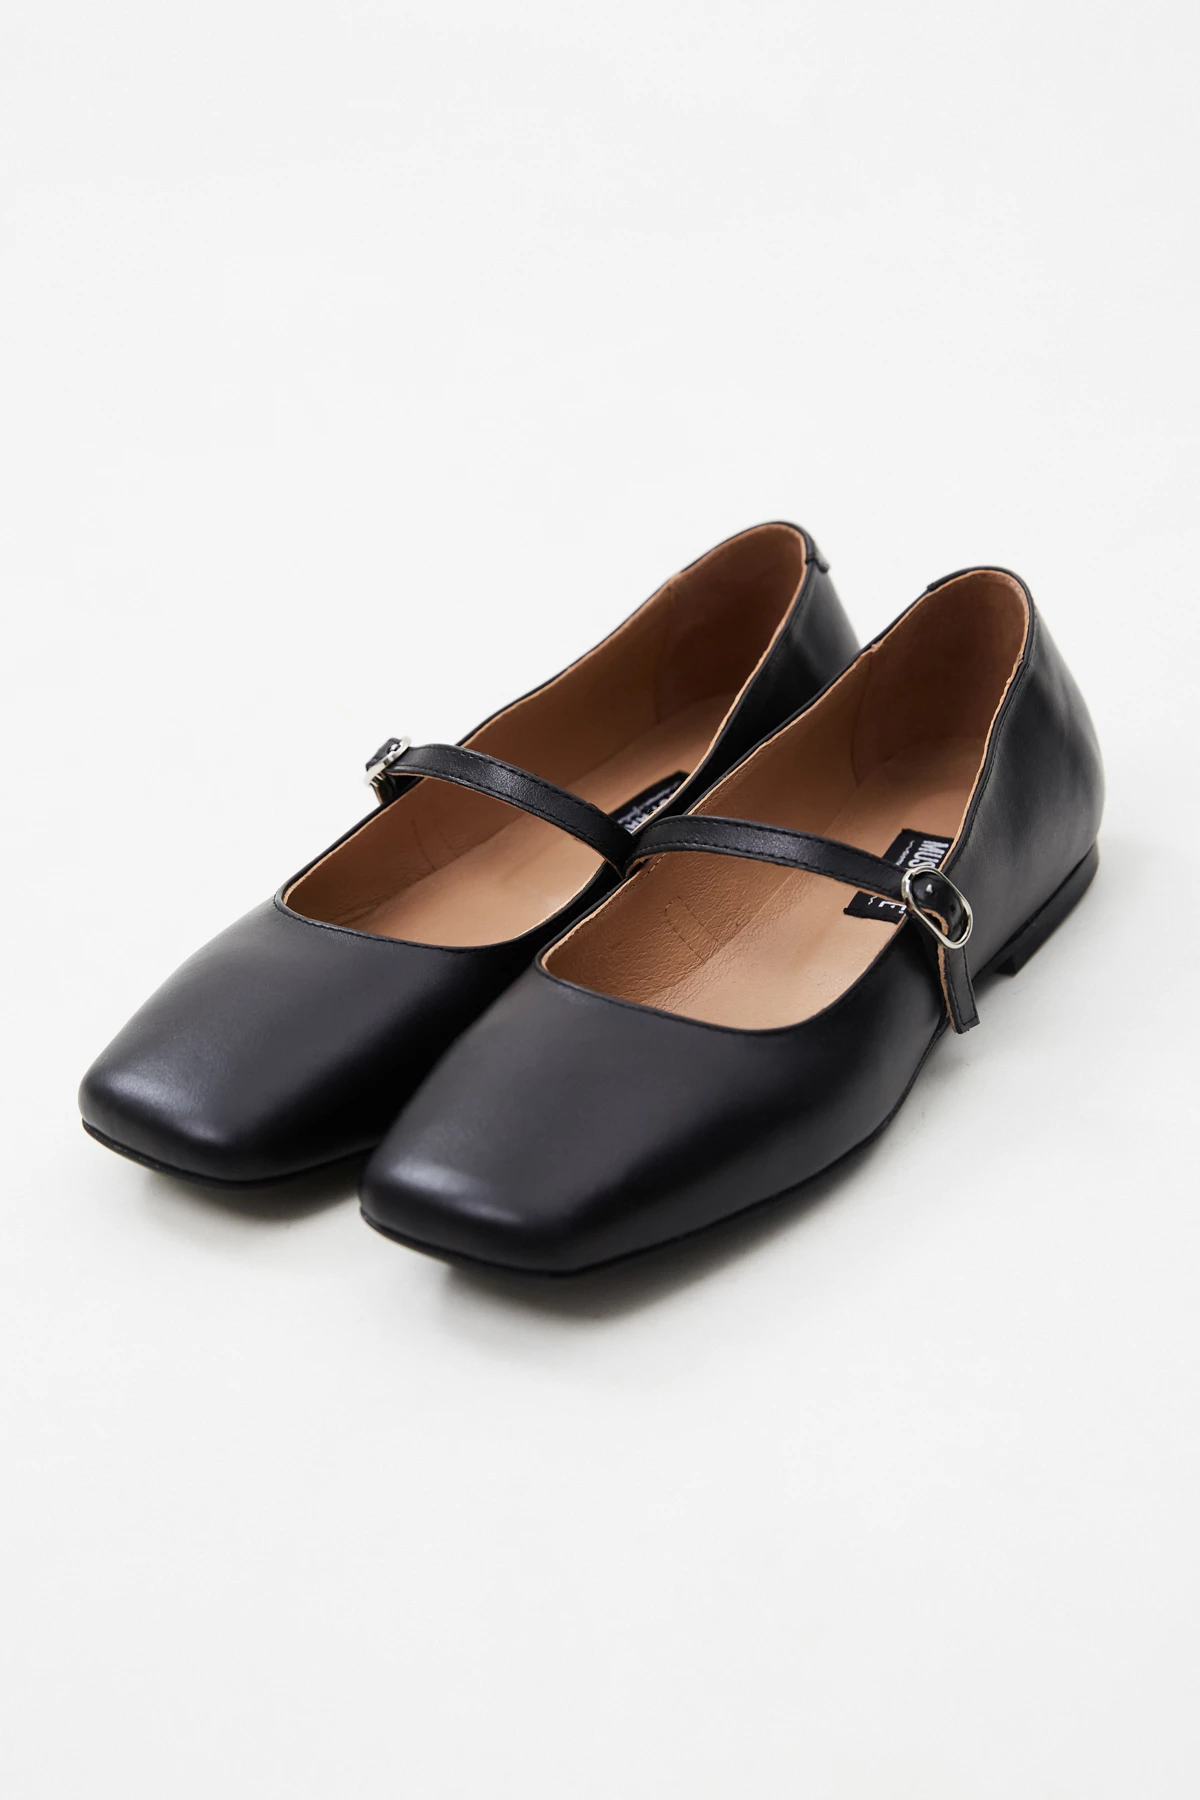 Black Mary Jane ballet flats made of genuine leather, photo 2